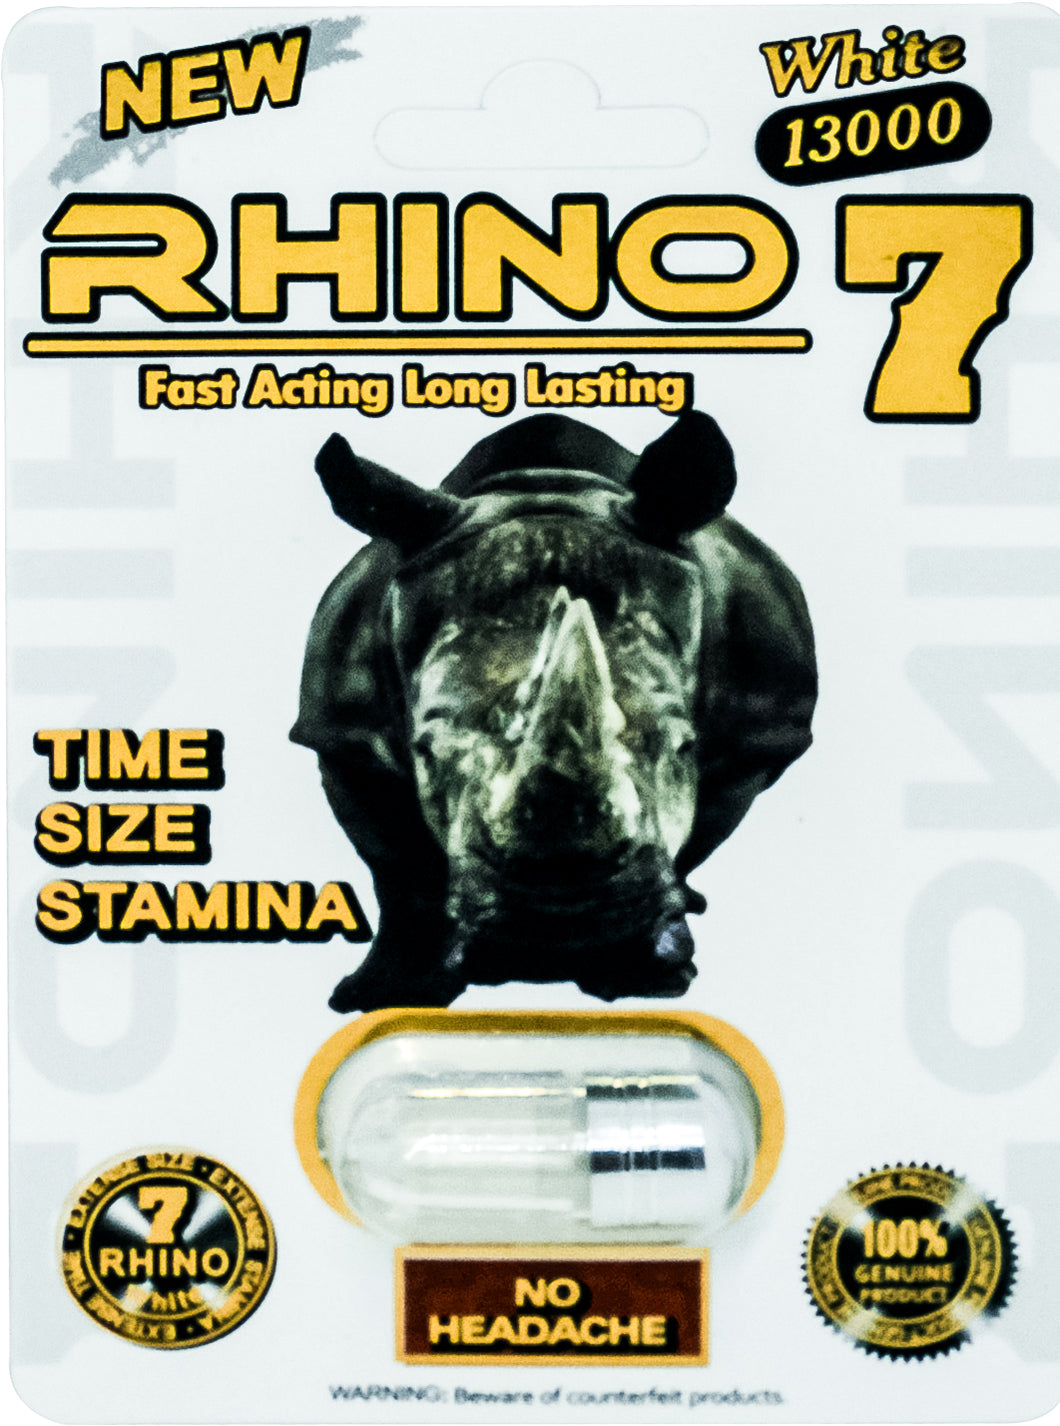 Rhino 7 WHITE 13000 - 10pills/ Fast Acting Amplifier for Strength, 10pills -Performance, Energy, and Endurance, Extra Strength